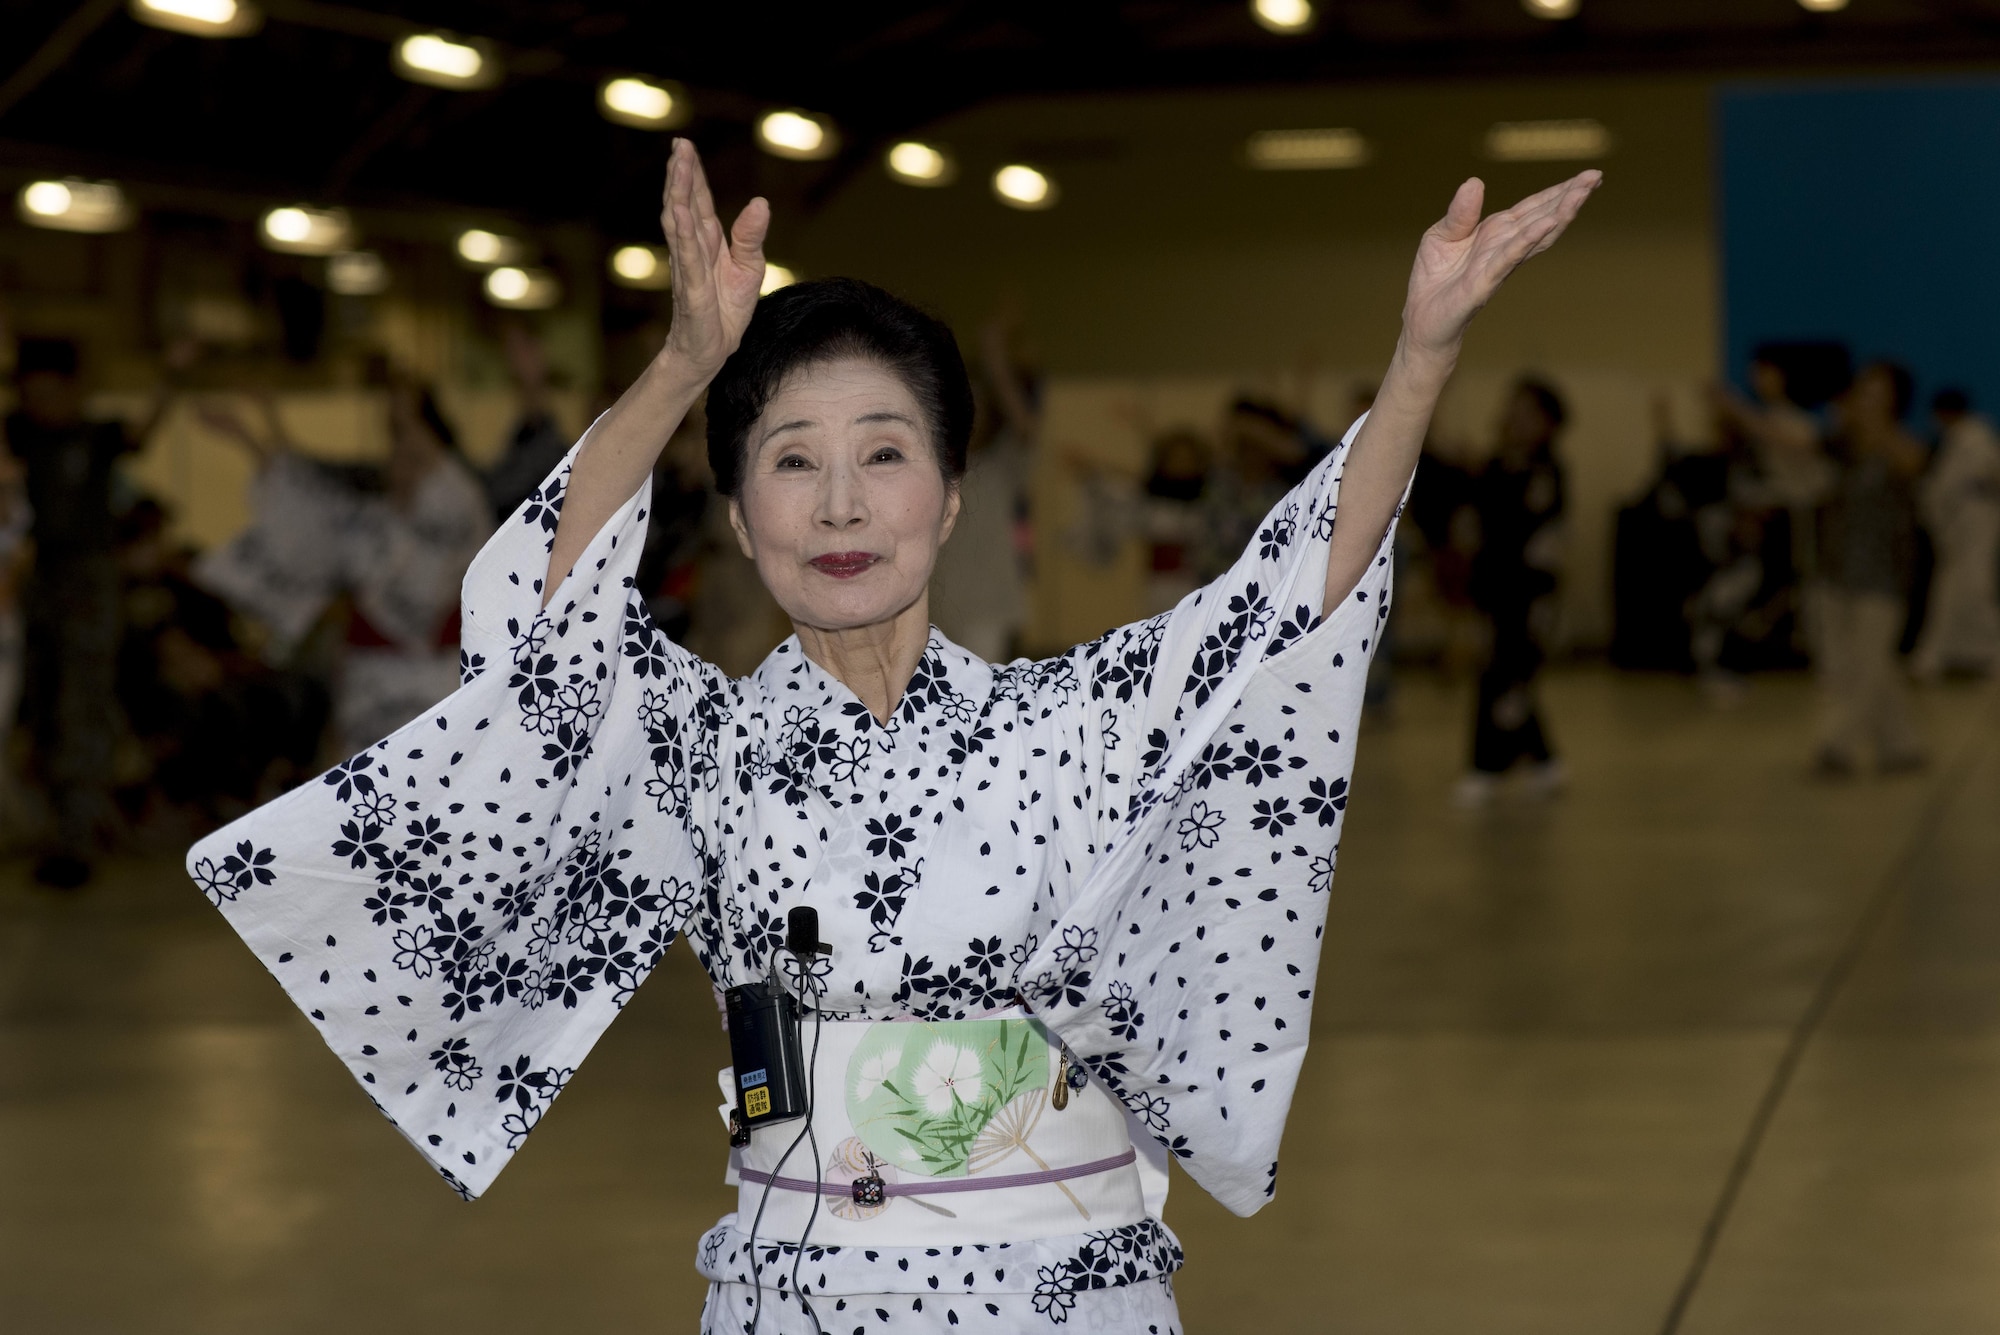 A Bon dancer performs during the 2016 Friendship Festival at Yokota Air Base, Japan, Sept. 18, 2016. The Friendship Festival is a two-day bilateral event aimed at enhancing the United States and Japanese relationship. (U.S. Air Force photo by Staff Sgt. Michael Washburn/Released)